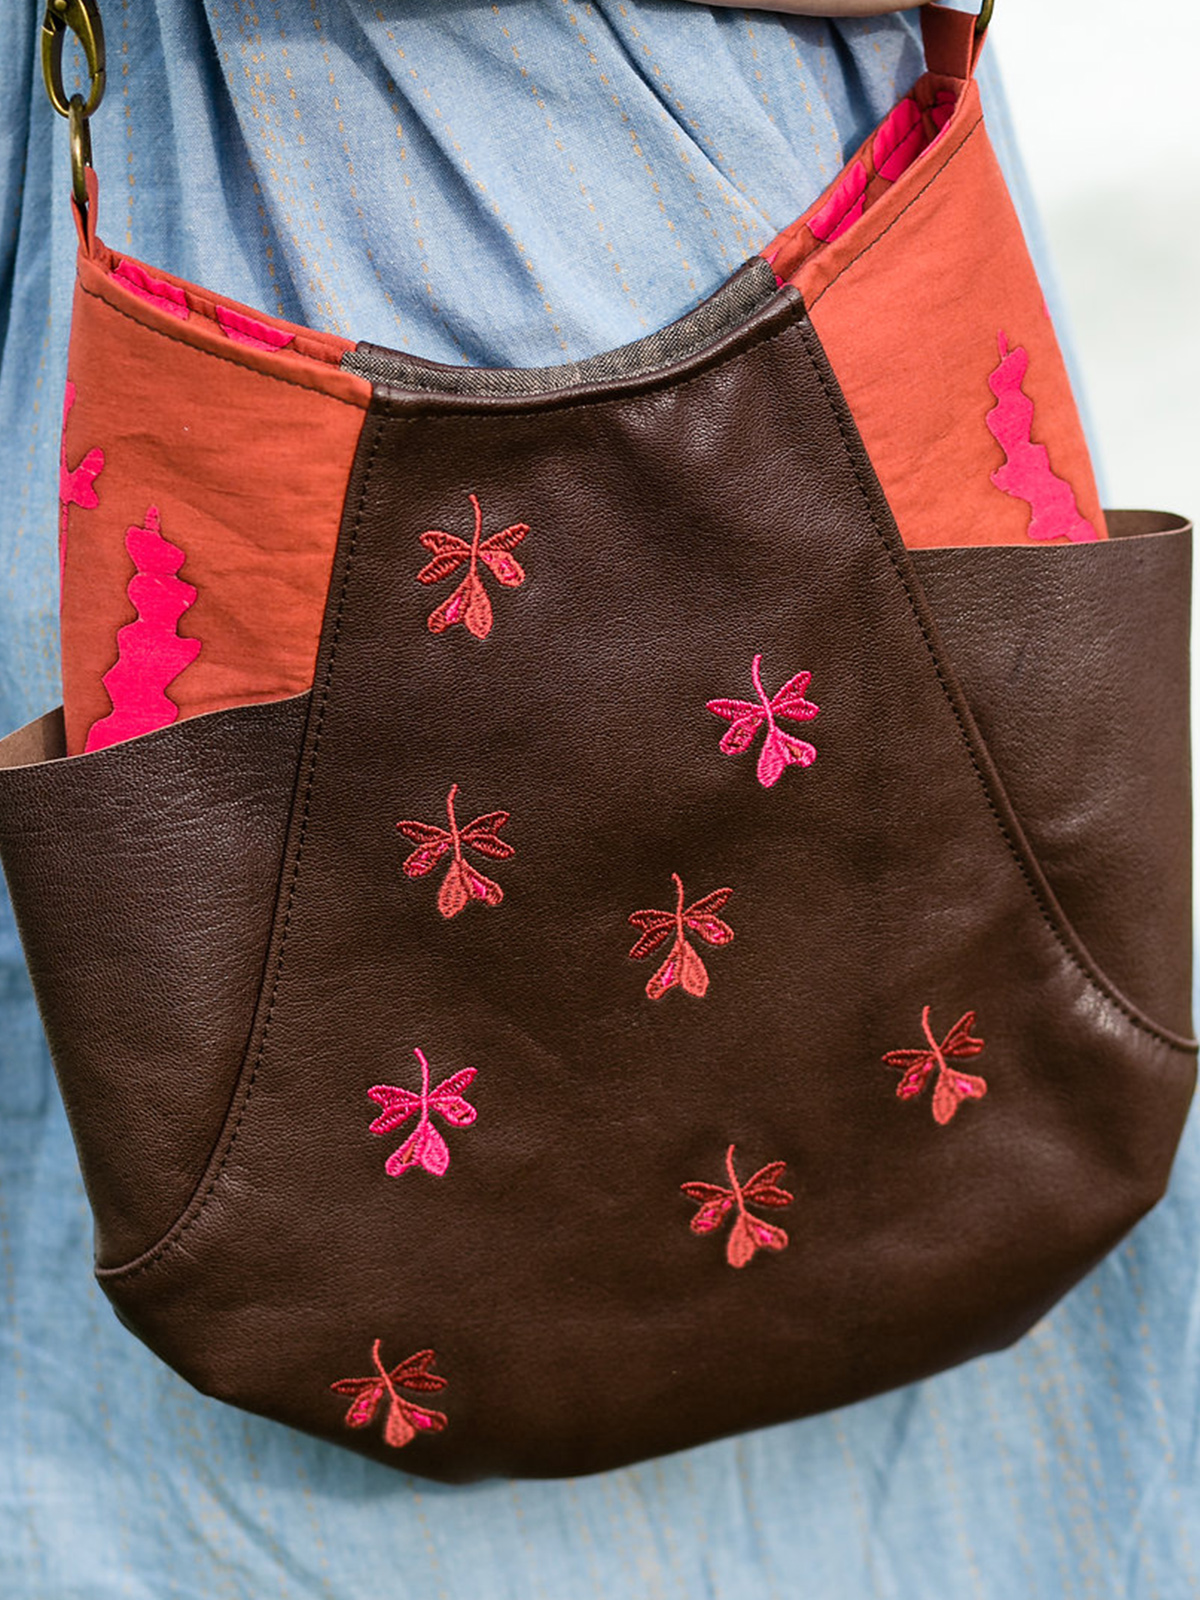 Embroidered Leather Bag with Leaf Design from Alison Glass Exlibris Design Collection